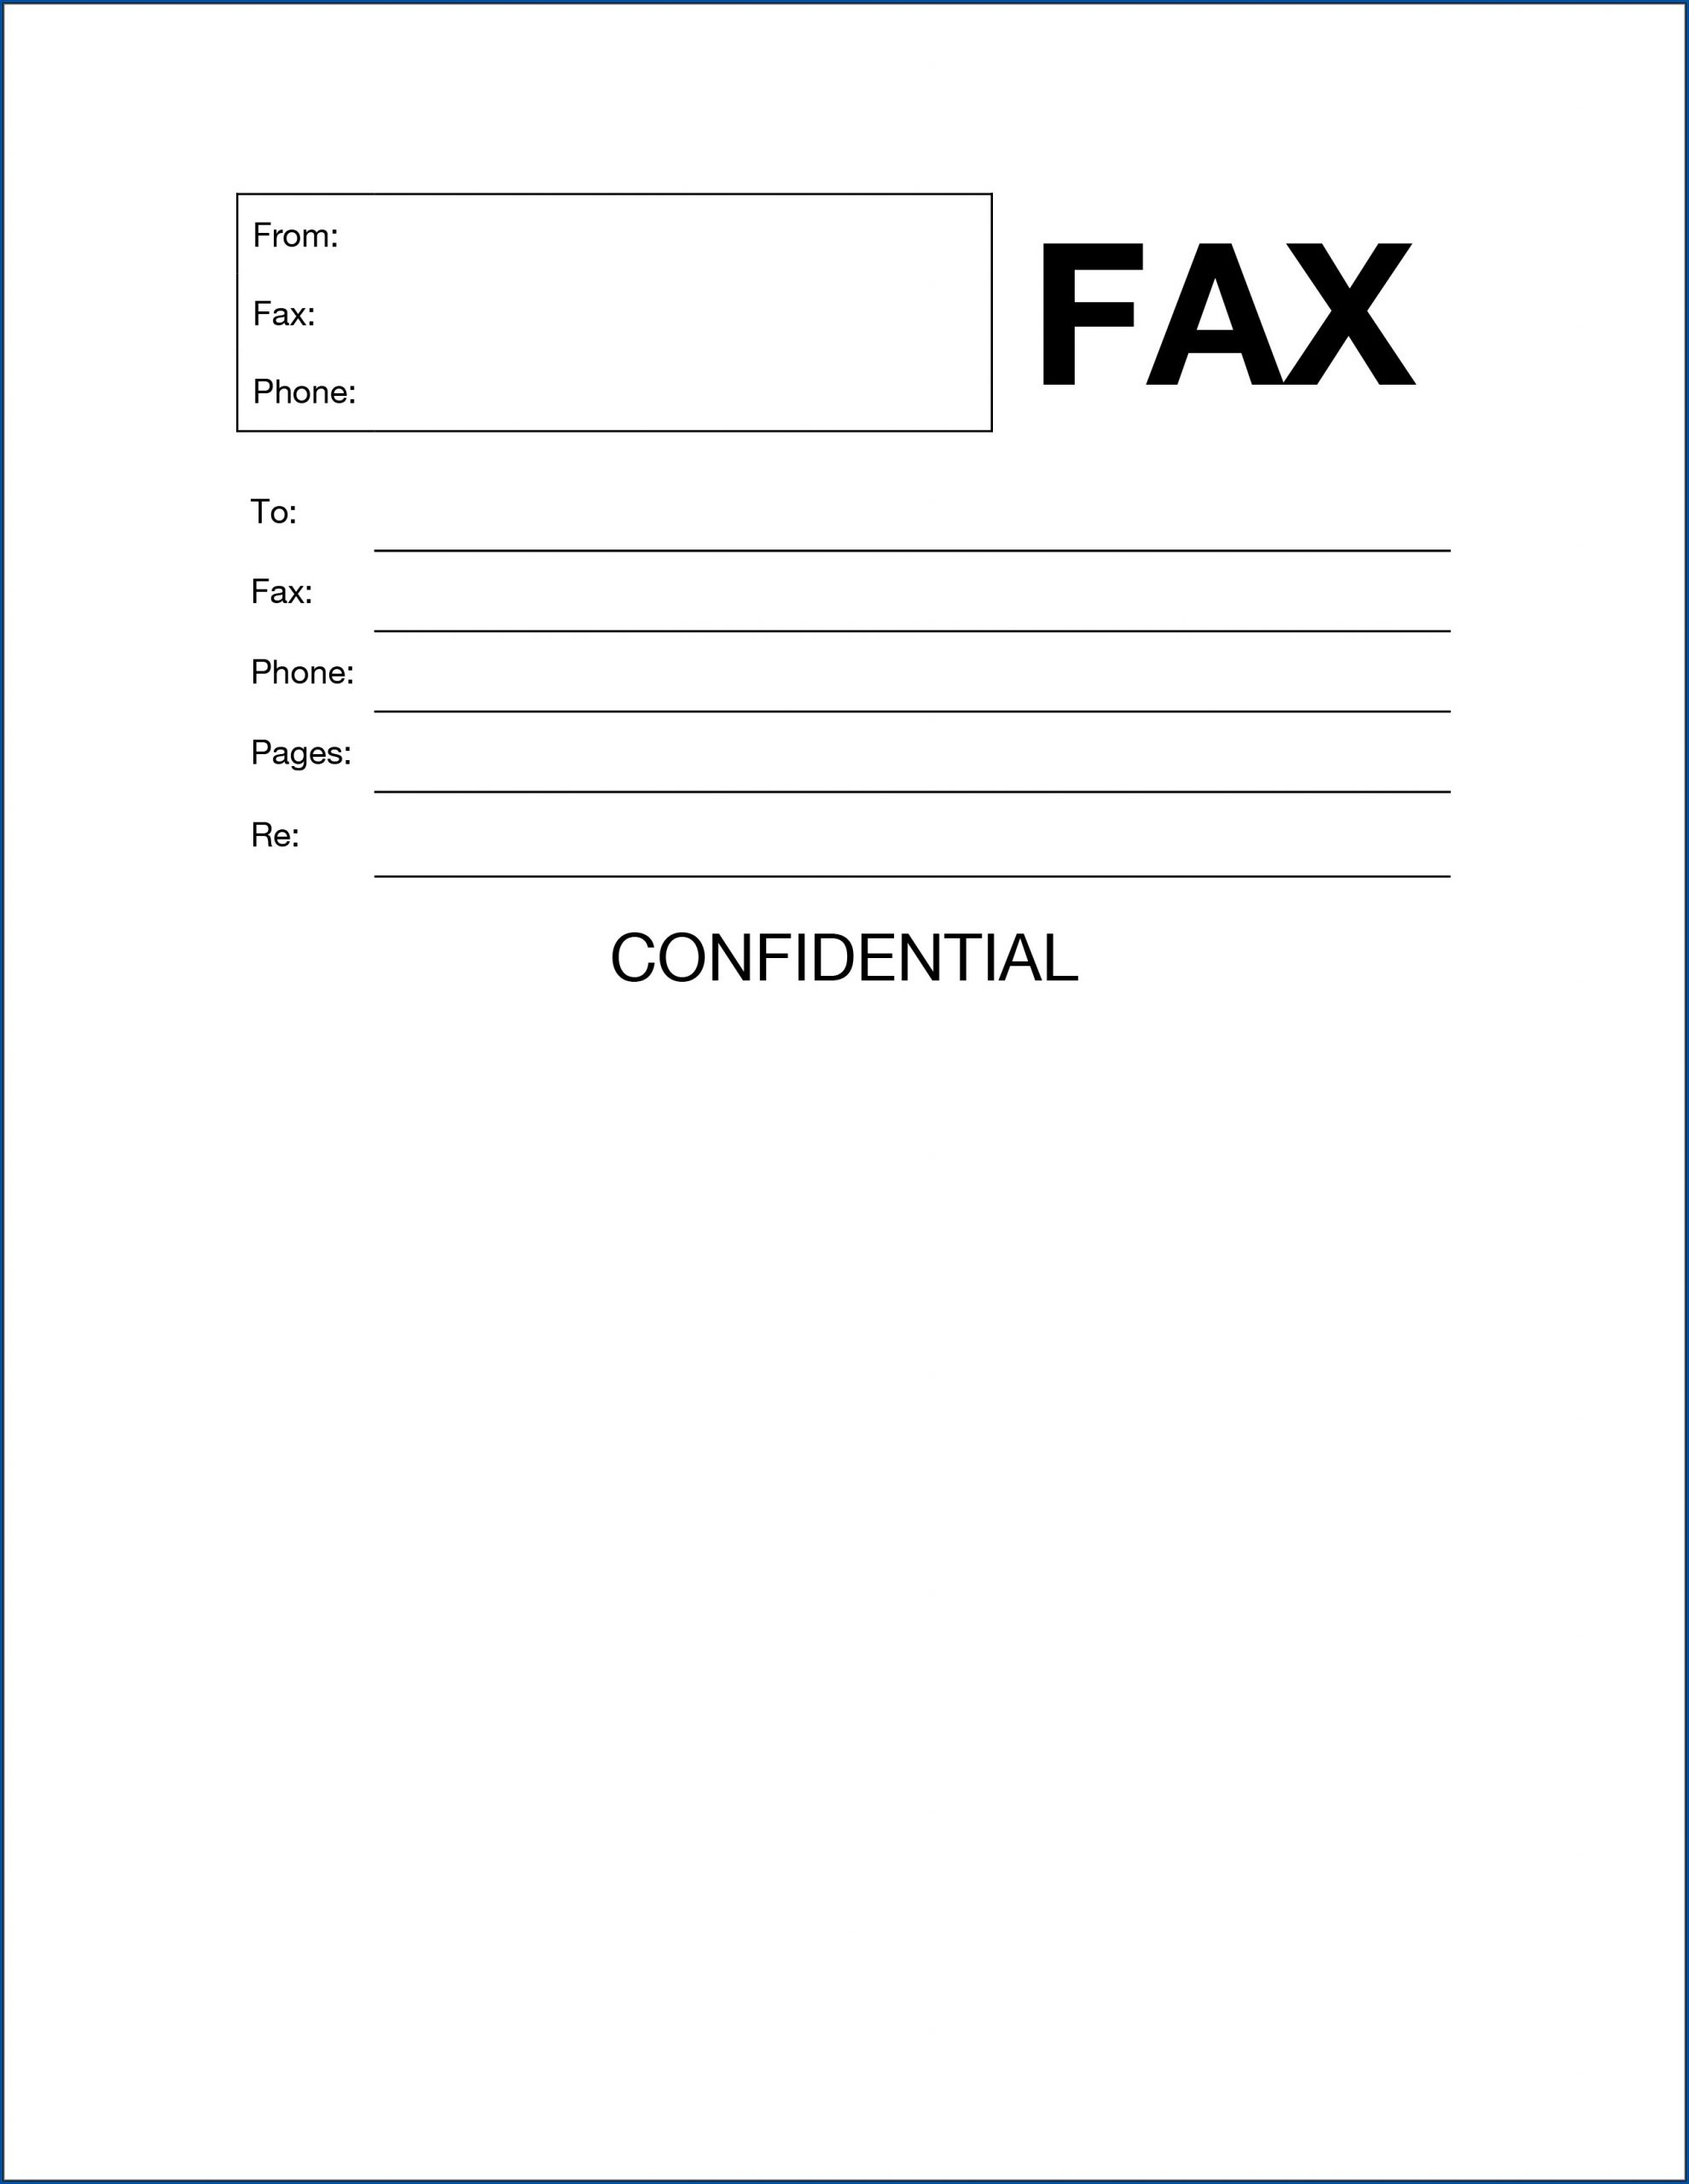 Sample of Fax Cover Sheet Word Template